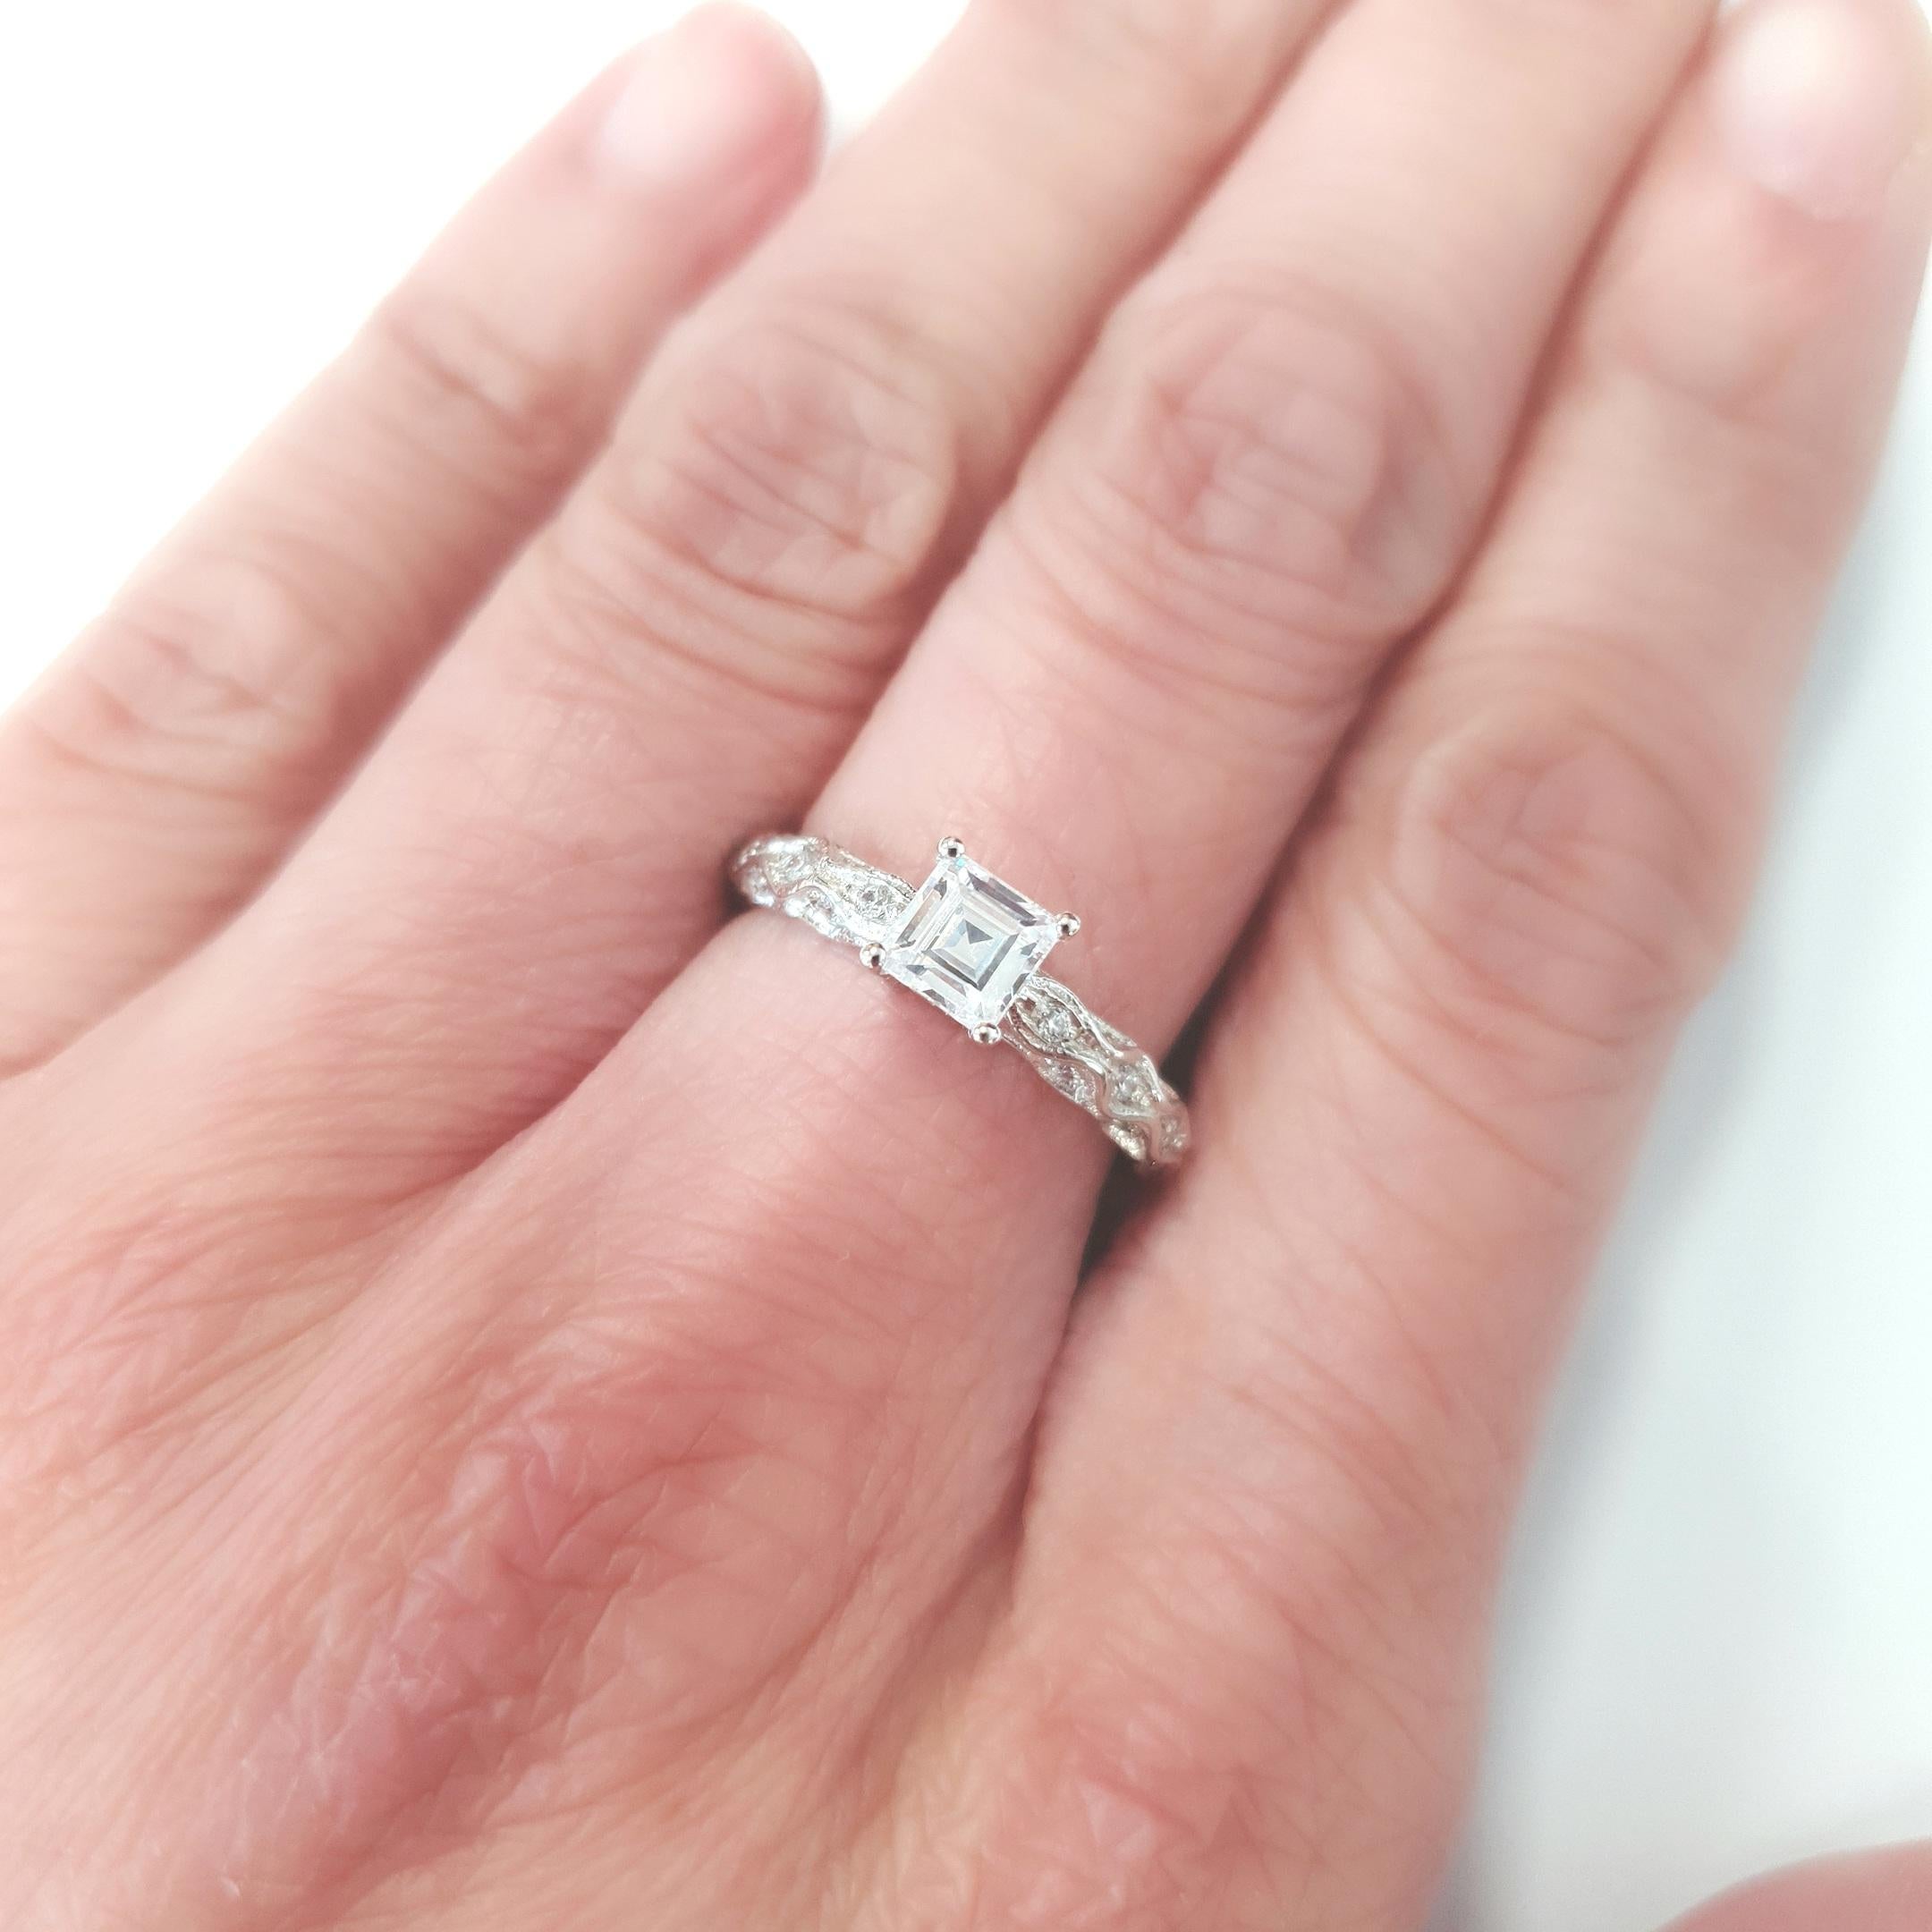 Introducing the epitome of elegance and romance, behold the Spring Willow 0.25ct Engagement Ring. This exquisite piece showcases a sterling silver band adorned with sparkles of cubic zirconia intricately woven into the the shoulders of the ring. At